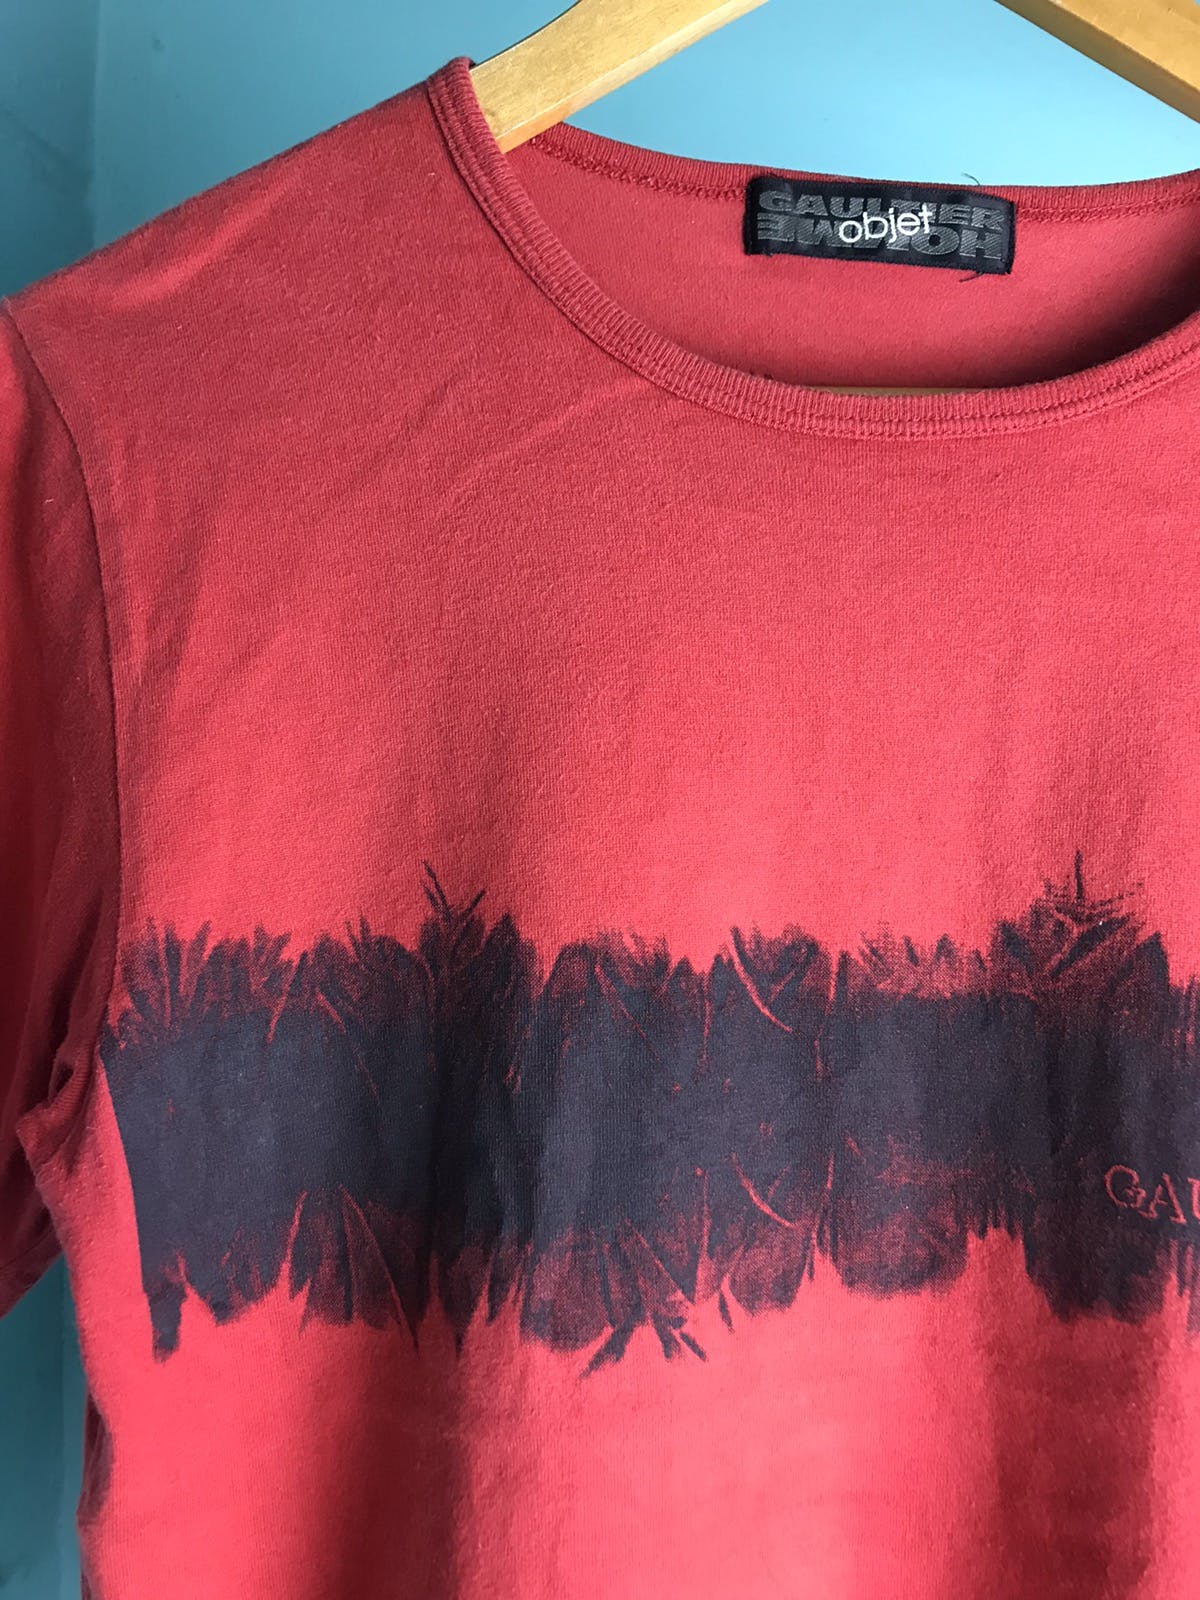 Vintage Gaultier Homme Object tee - 8